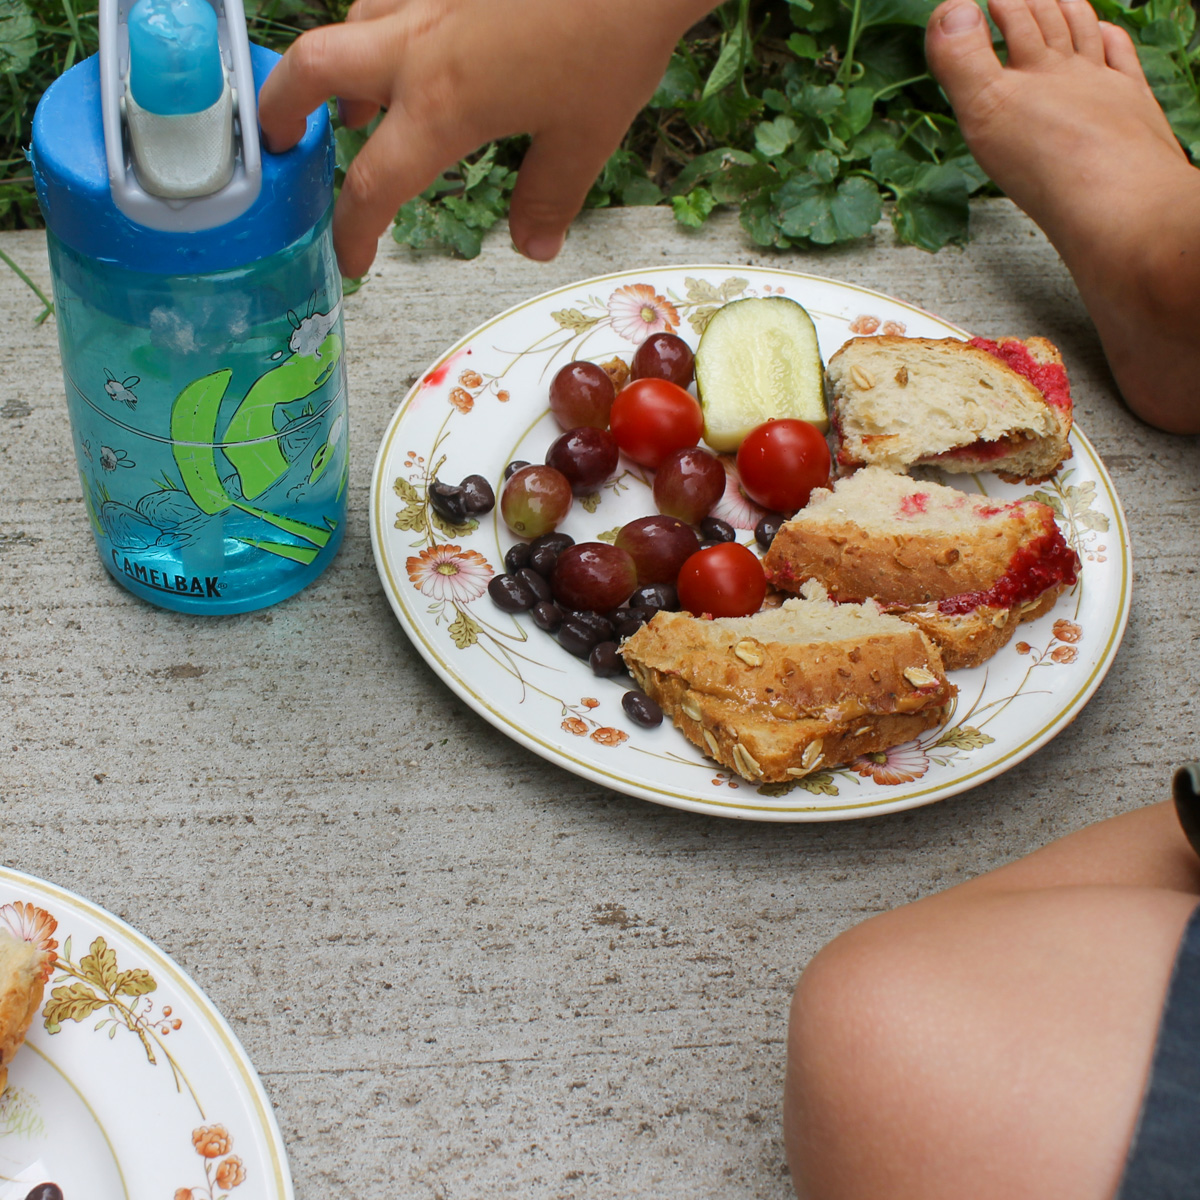 A barefoot kid eating an outdoor lunch, peanut butter sandwich, grapes, tomato and pickles.